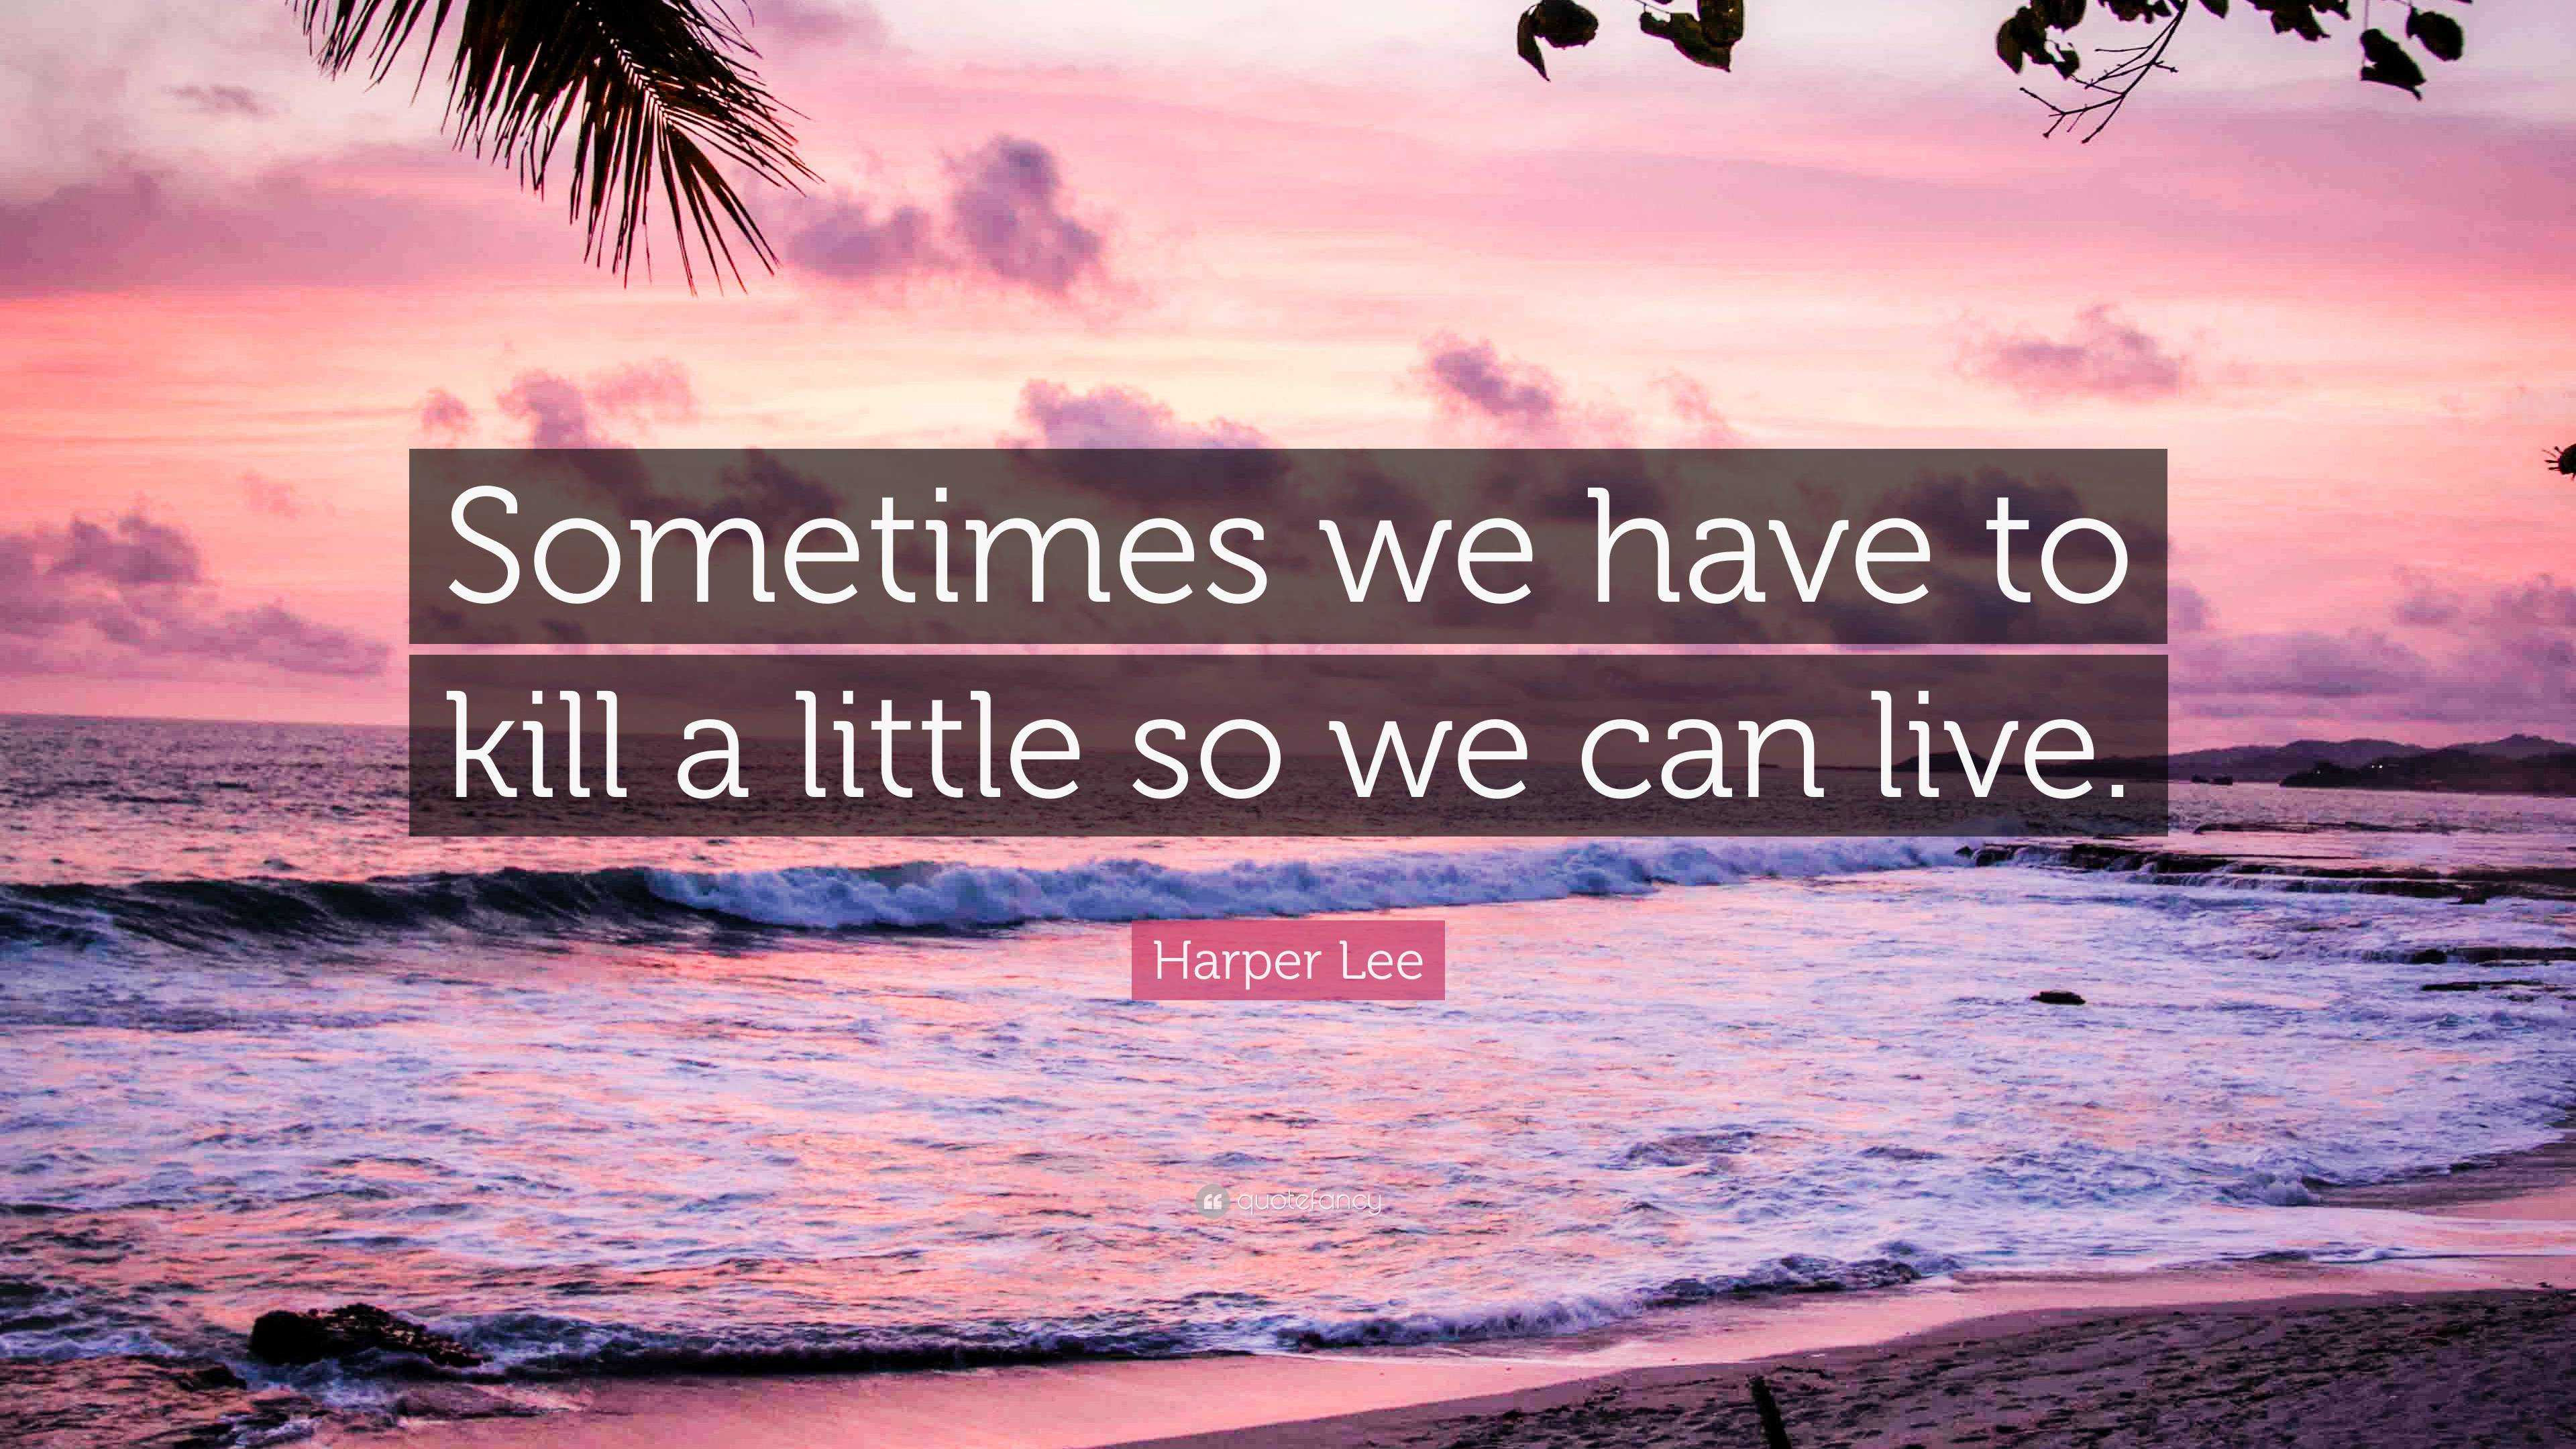 Harper Lee Quote: “Sometimes we have to kill a little so we can live.”